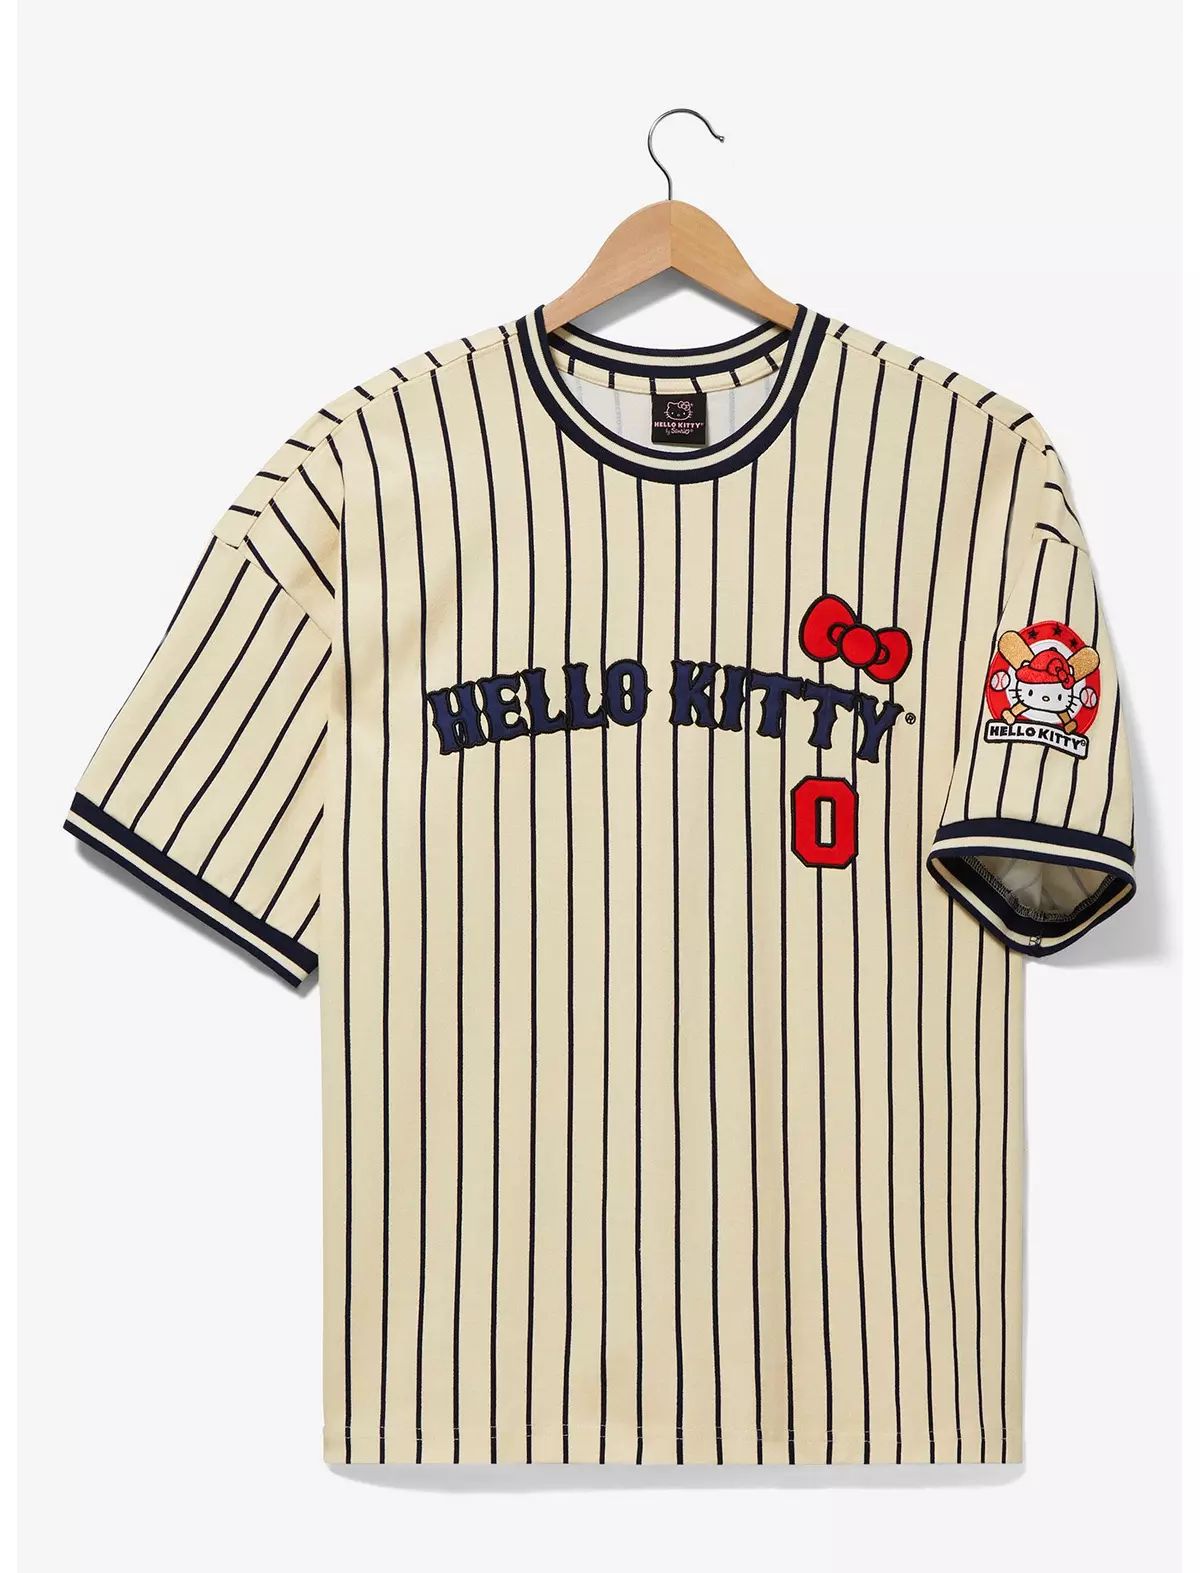 Sanrio Hello Kitty Striped Baseball Jersey - BoxLunch Exclusive | BoxLunch